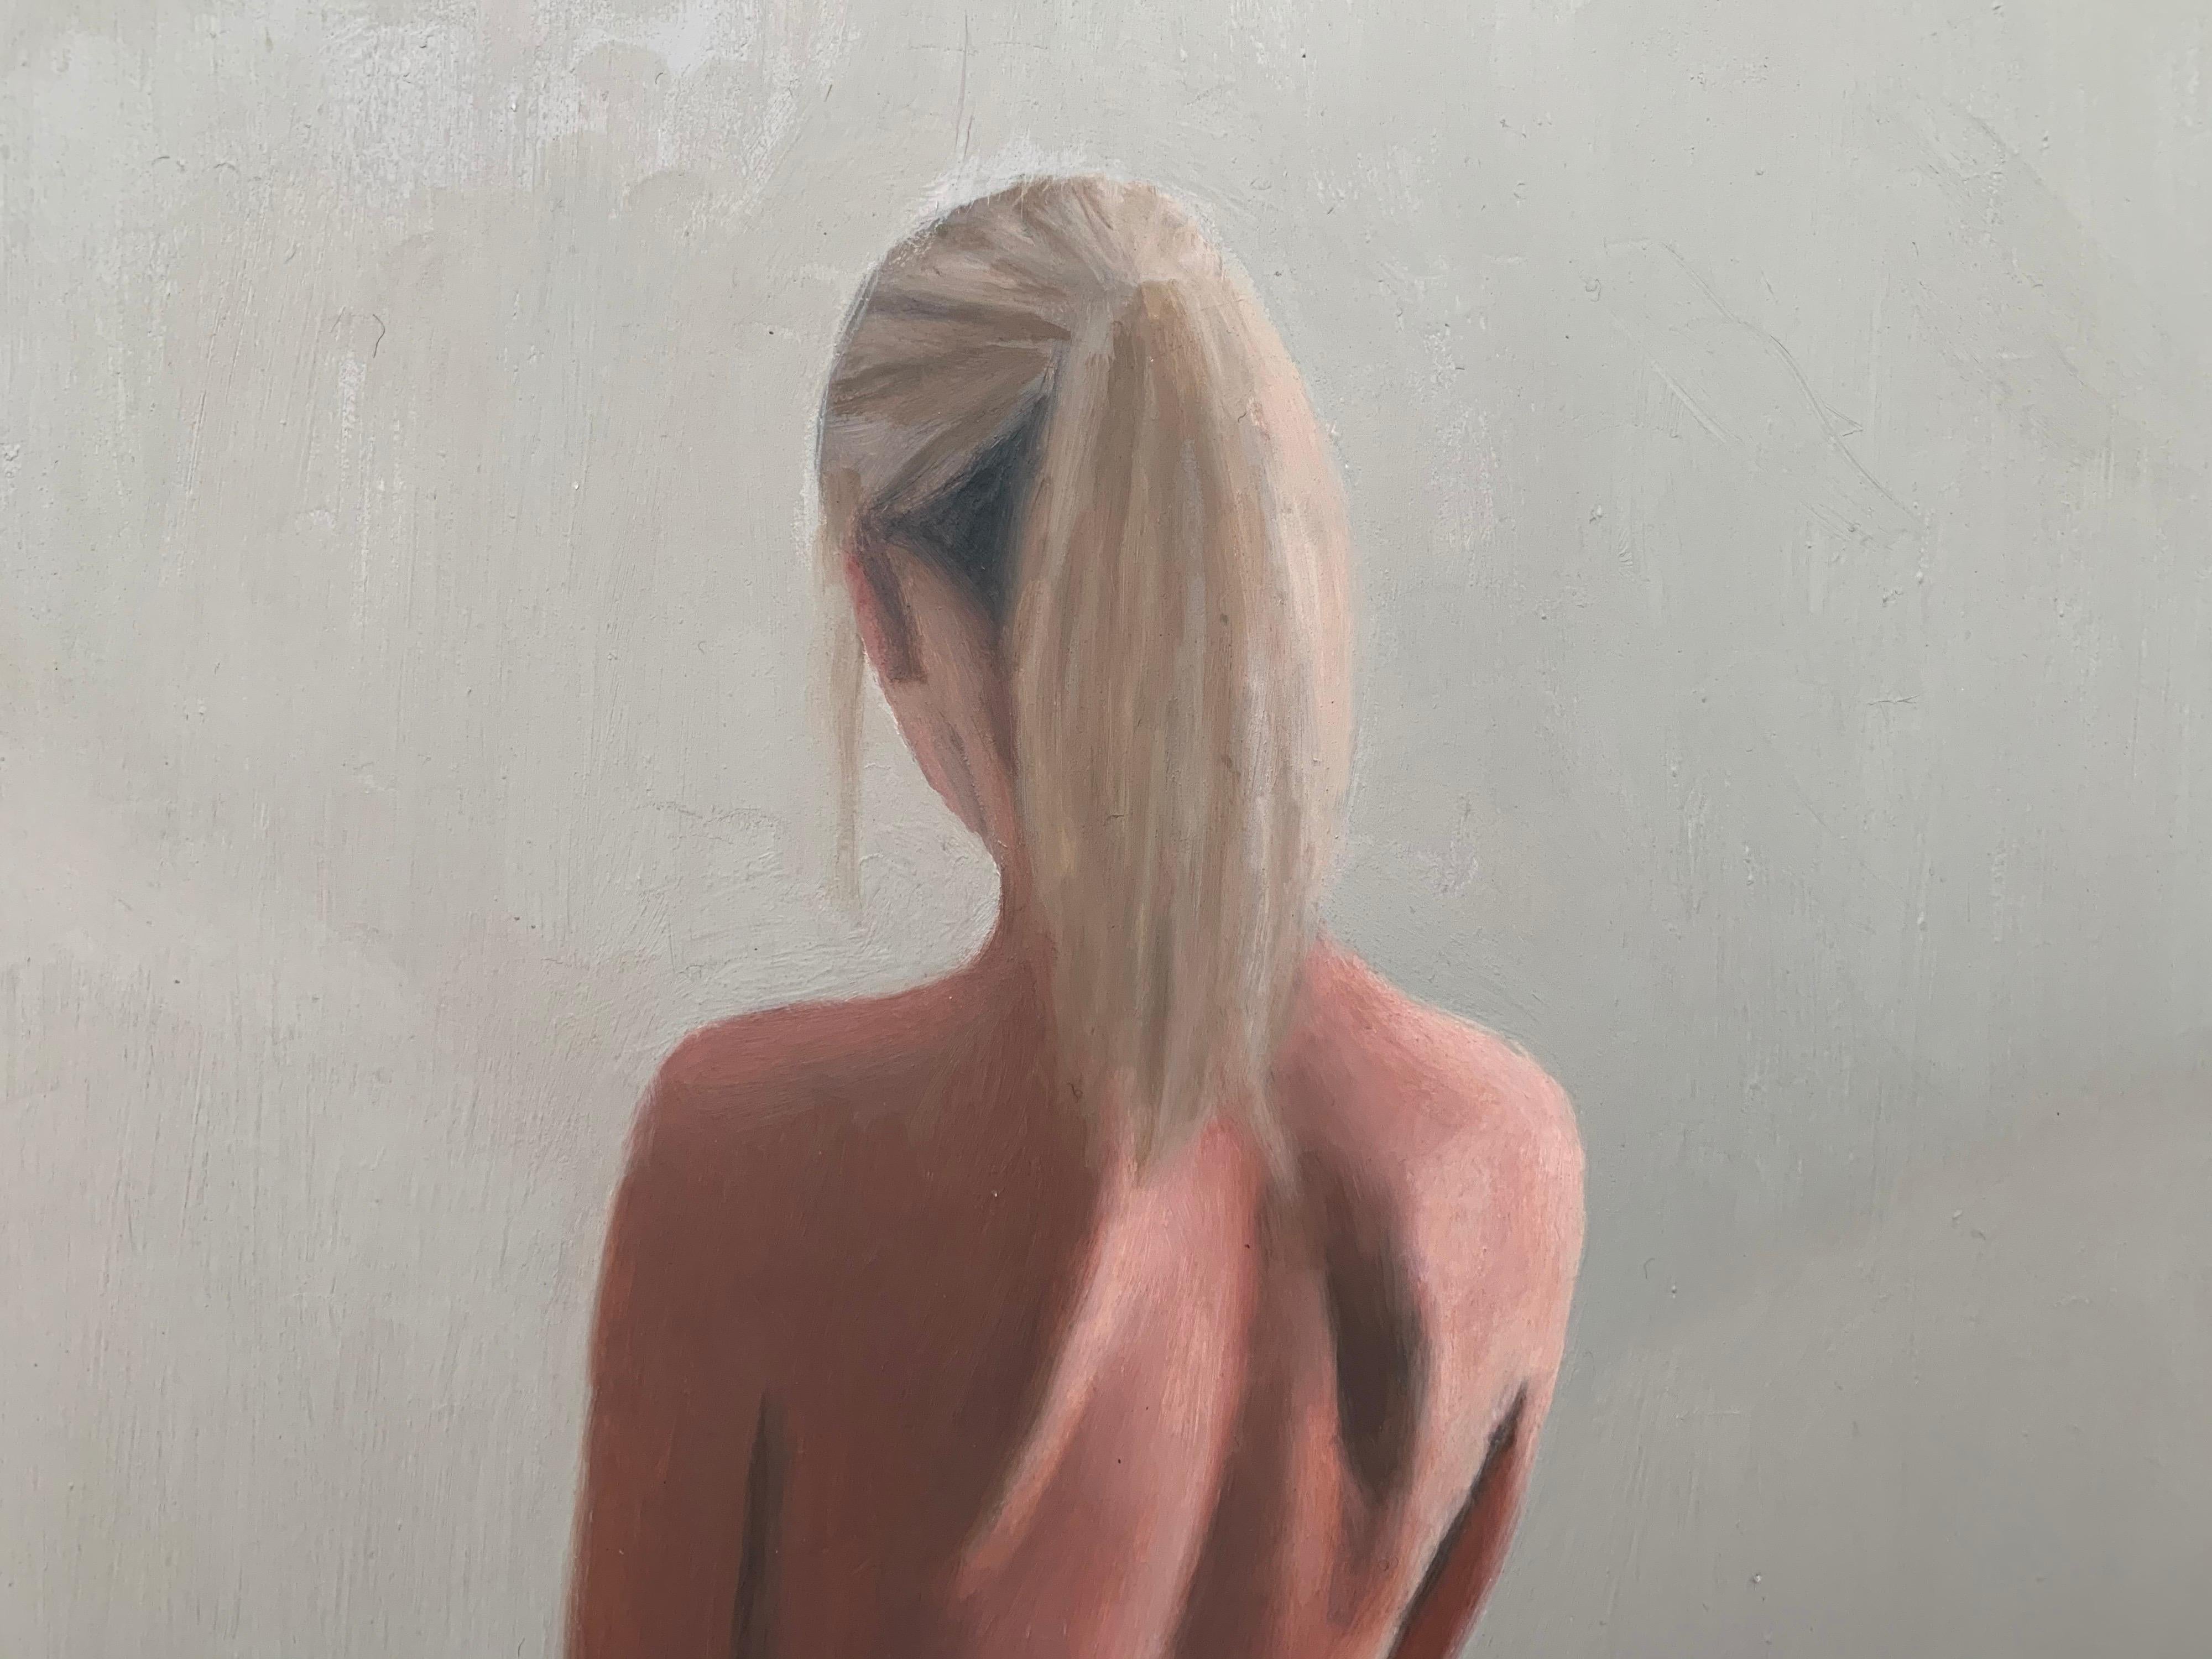 Oil Painting of Standing Female Nude Figure by British Contemporary Artist Mark Clark

Art measures 8 x 17 inches
Frame measures 14 x 23 inches (approx.)

Mark Clark is a British Artist, born in 1959. Clark is a graduate of the Loughborough College